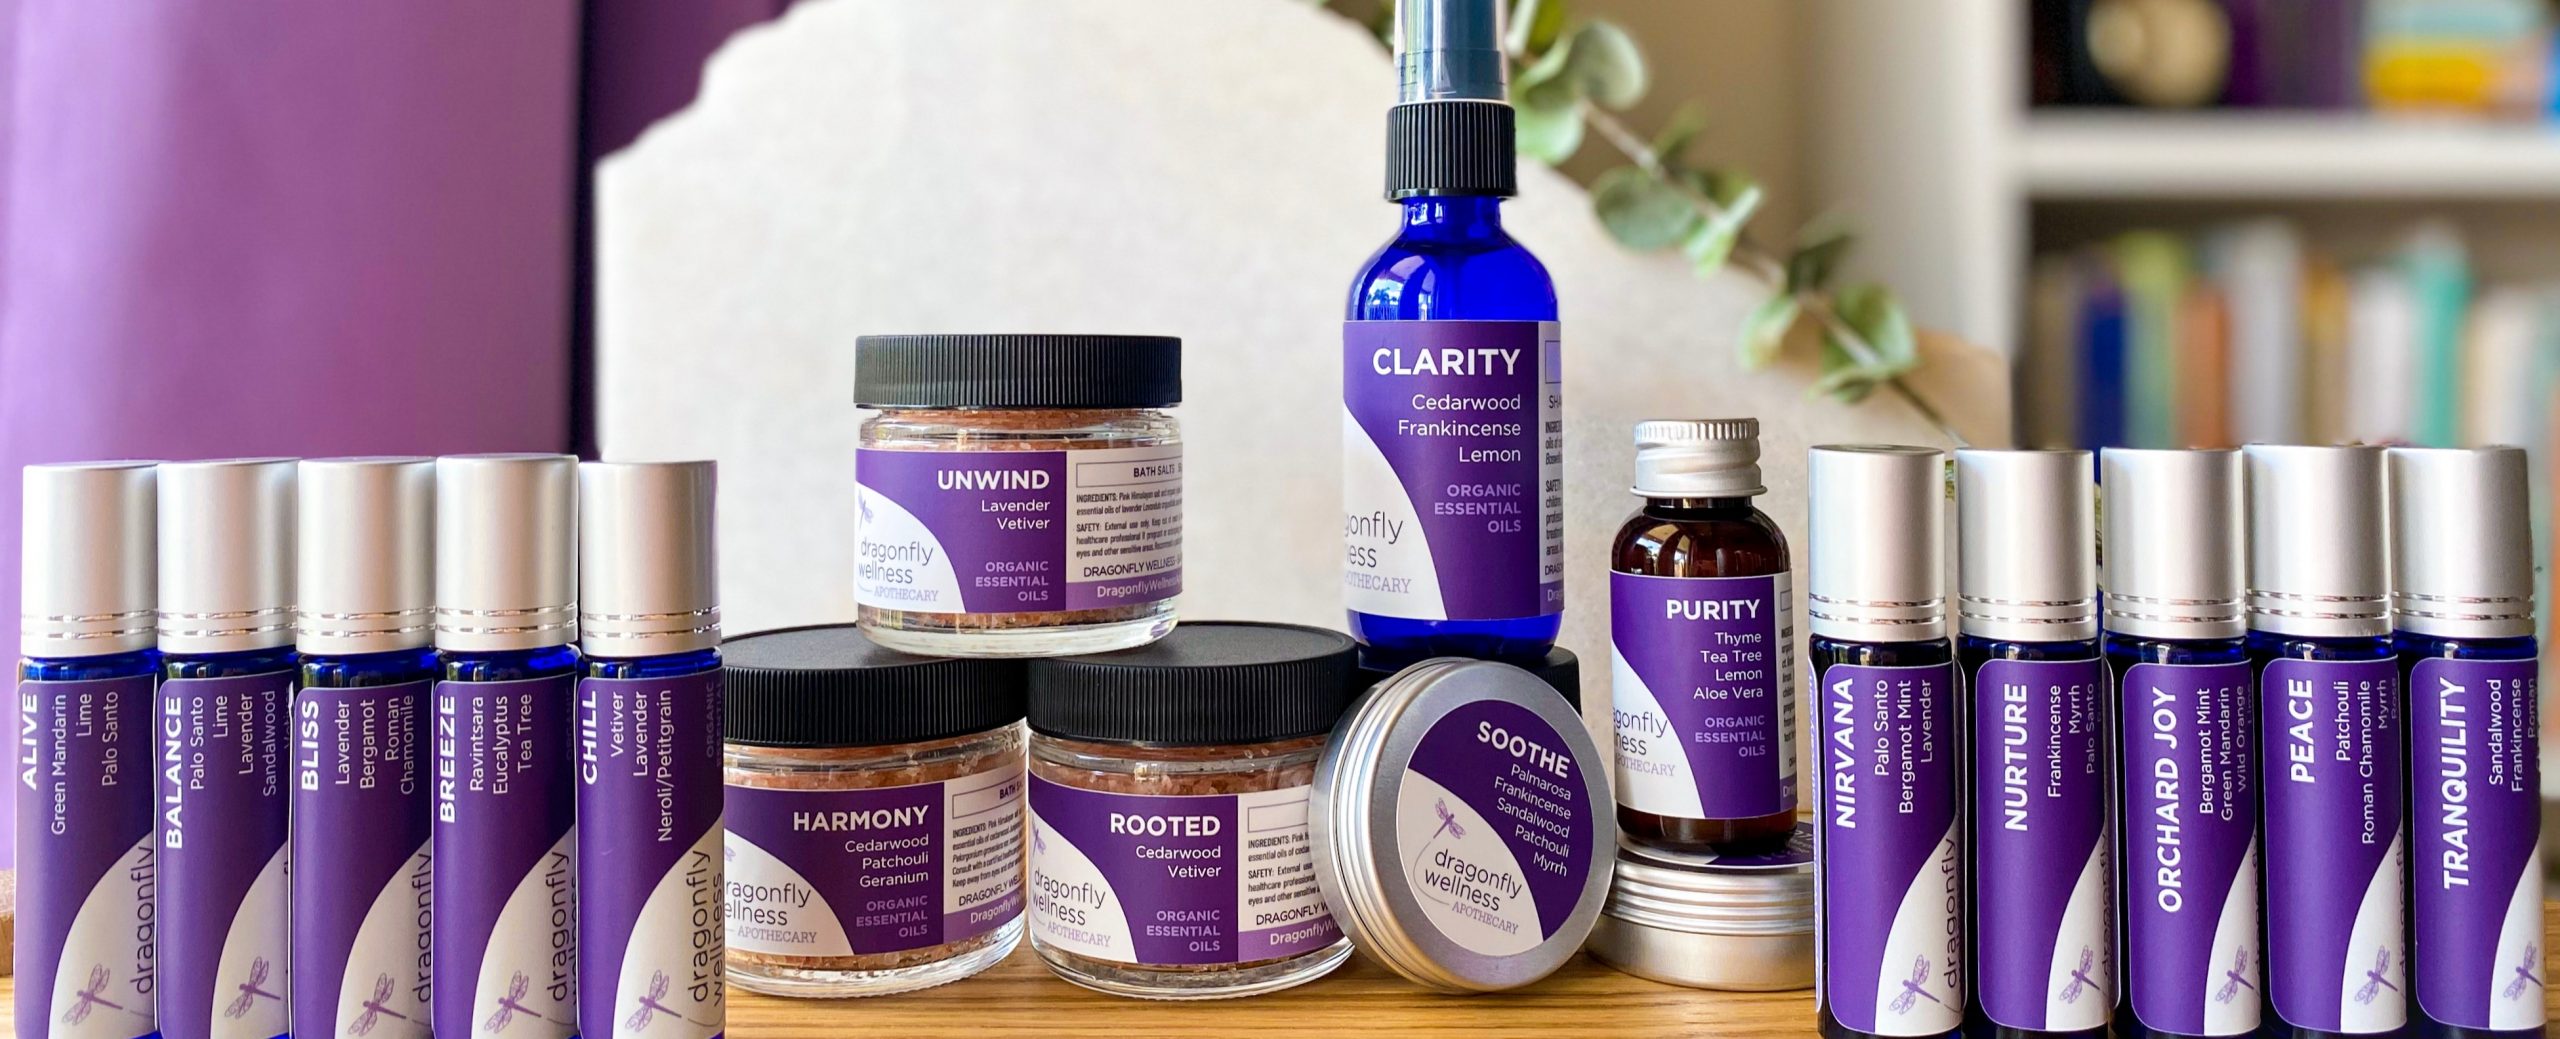 Dragonfly Wellness Apothecary product line